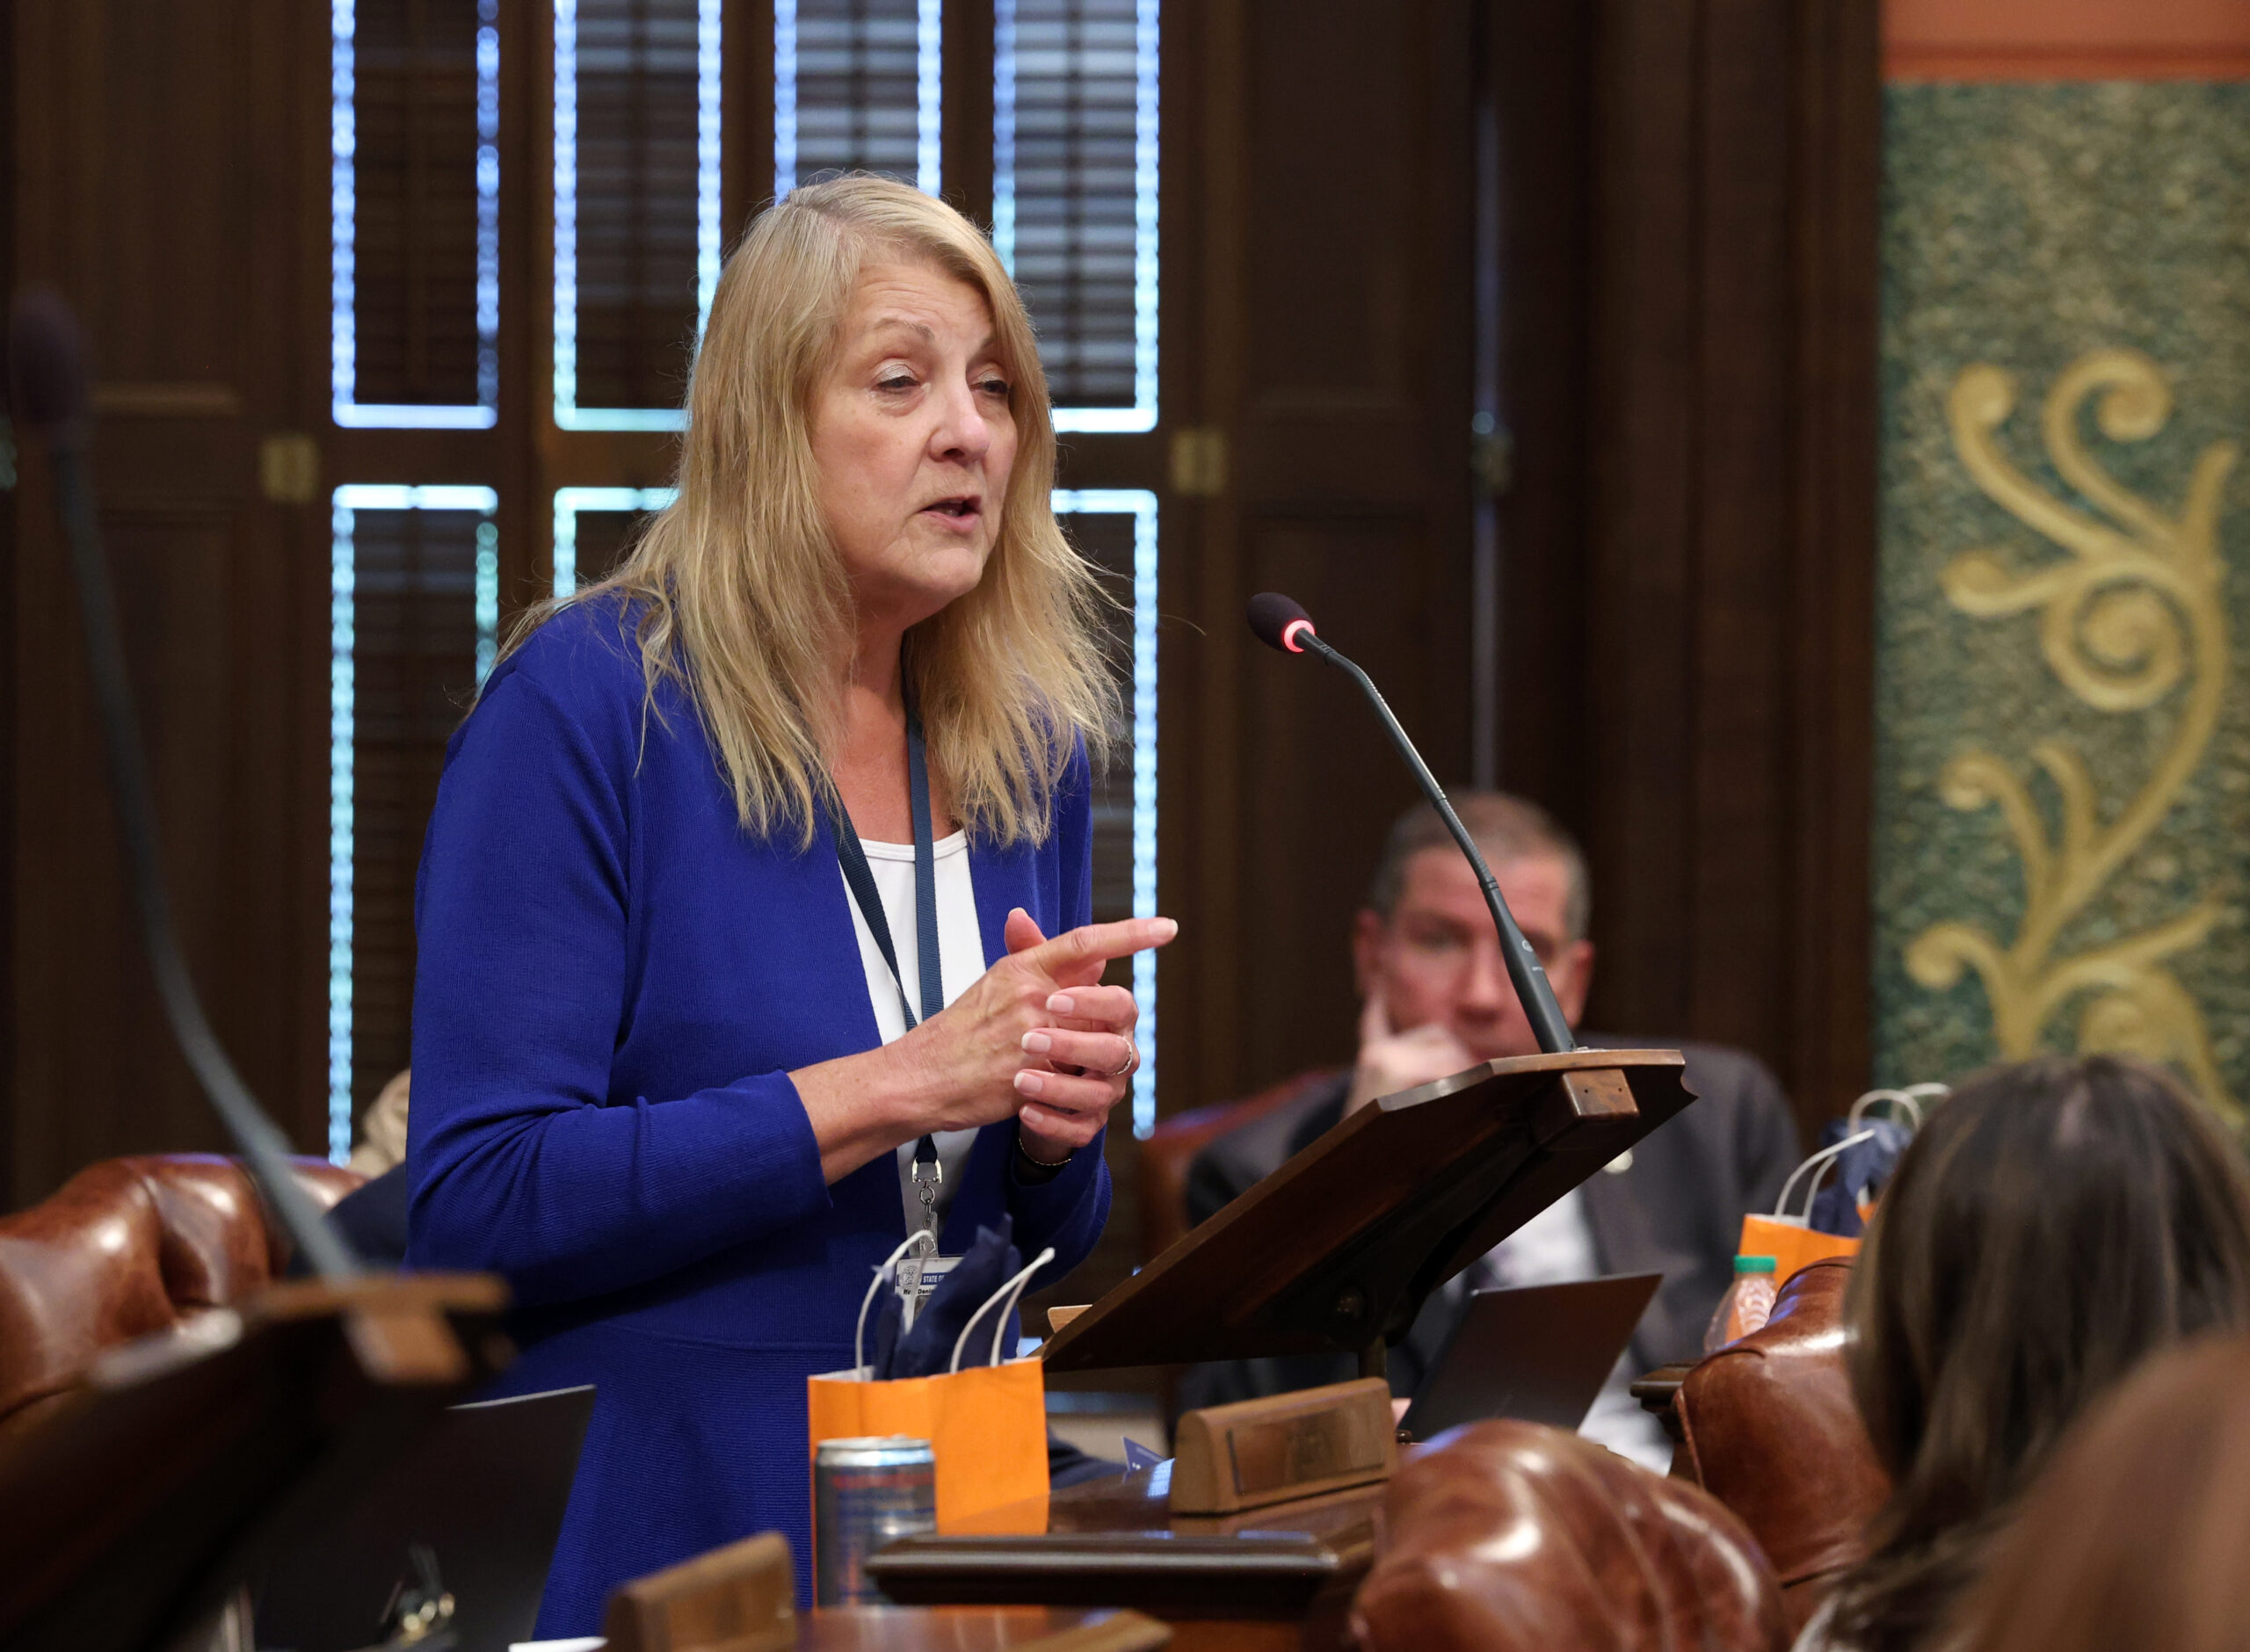 State Rep. Denise Mentzer (D-Mt. Clemens) delivers a speech on the House floor.